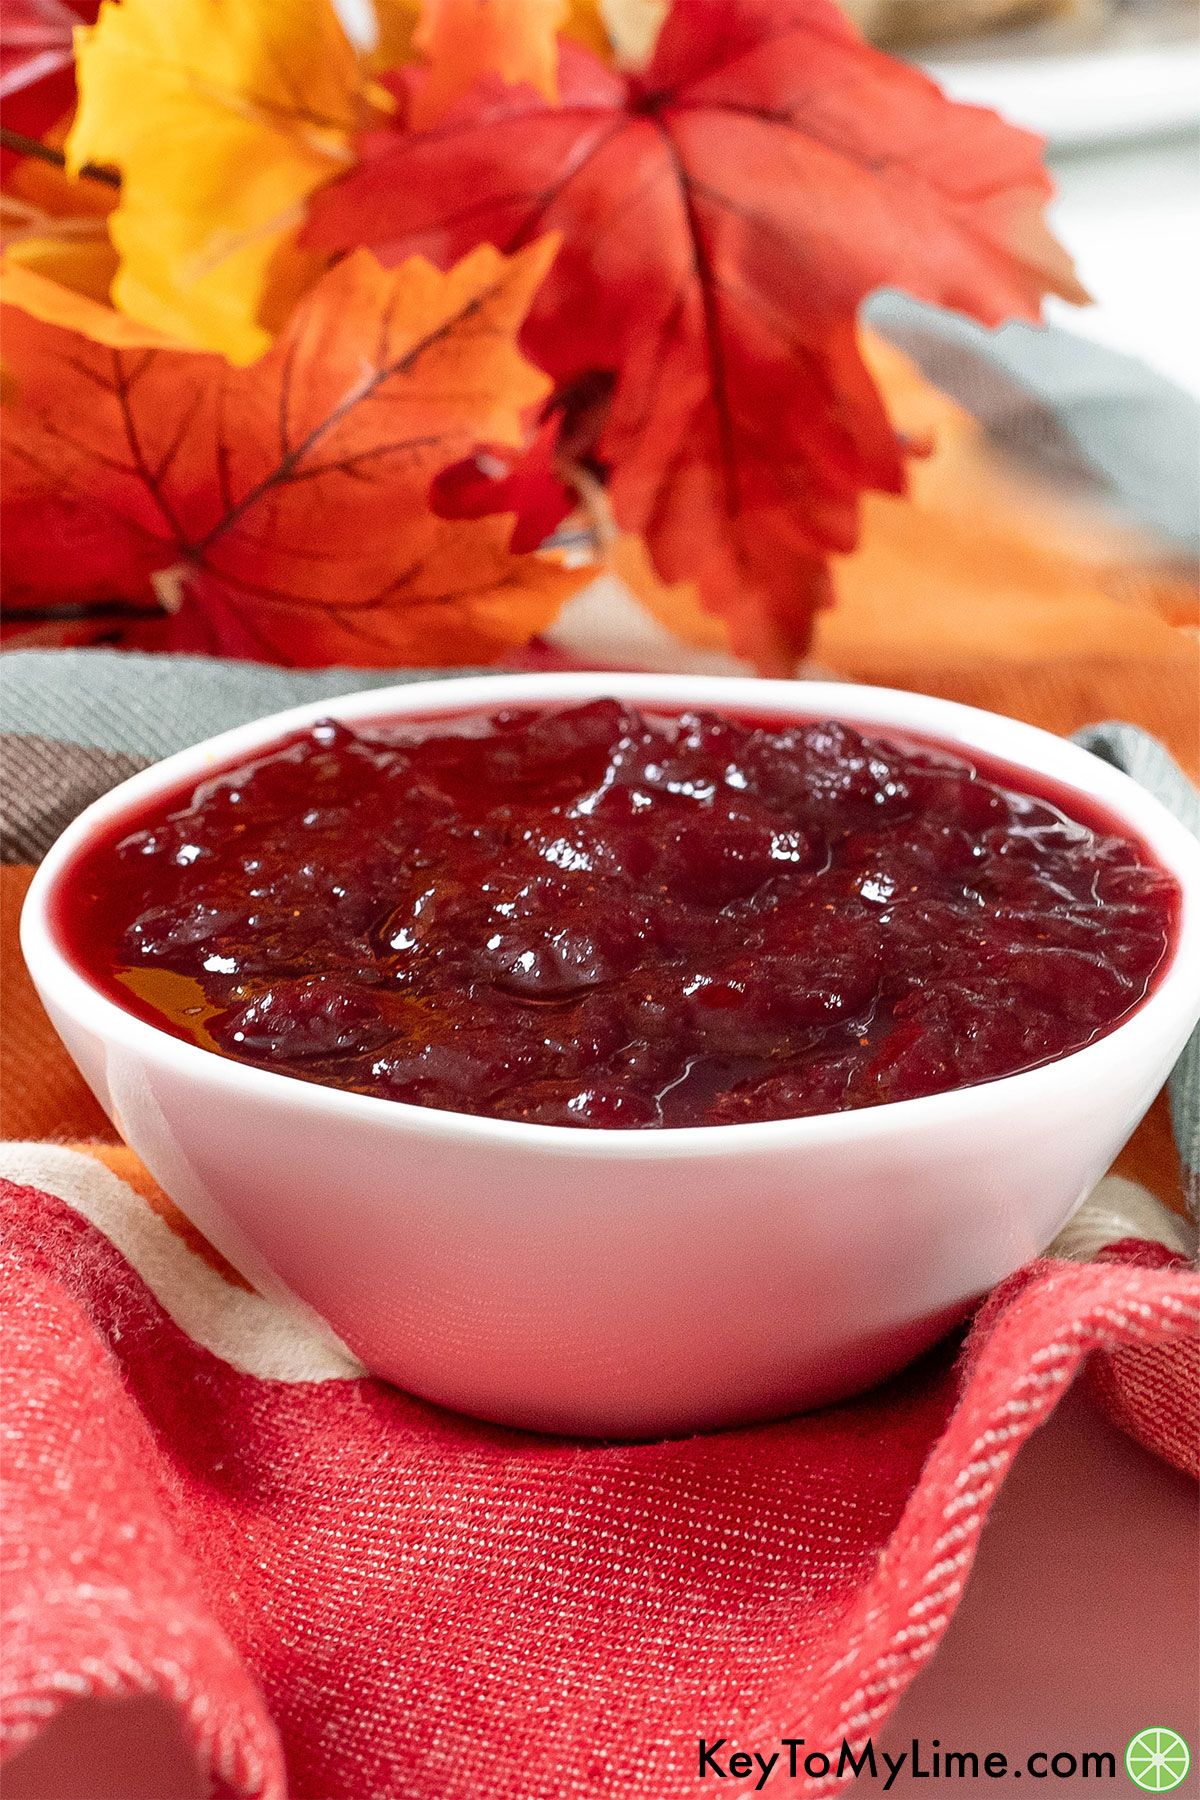 A side shot image of cranberry sauce in a small white bowl on top of a colorful napkin.